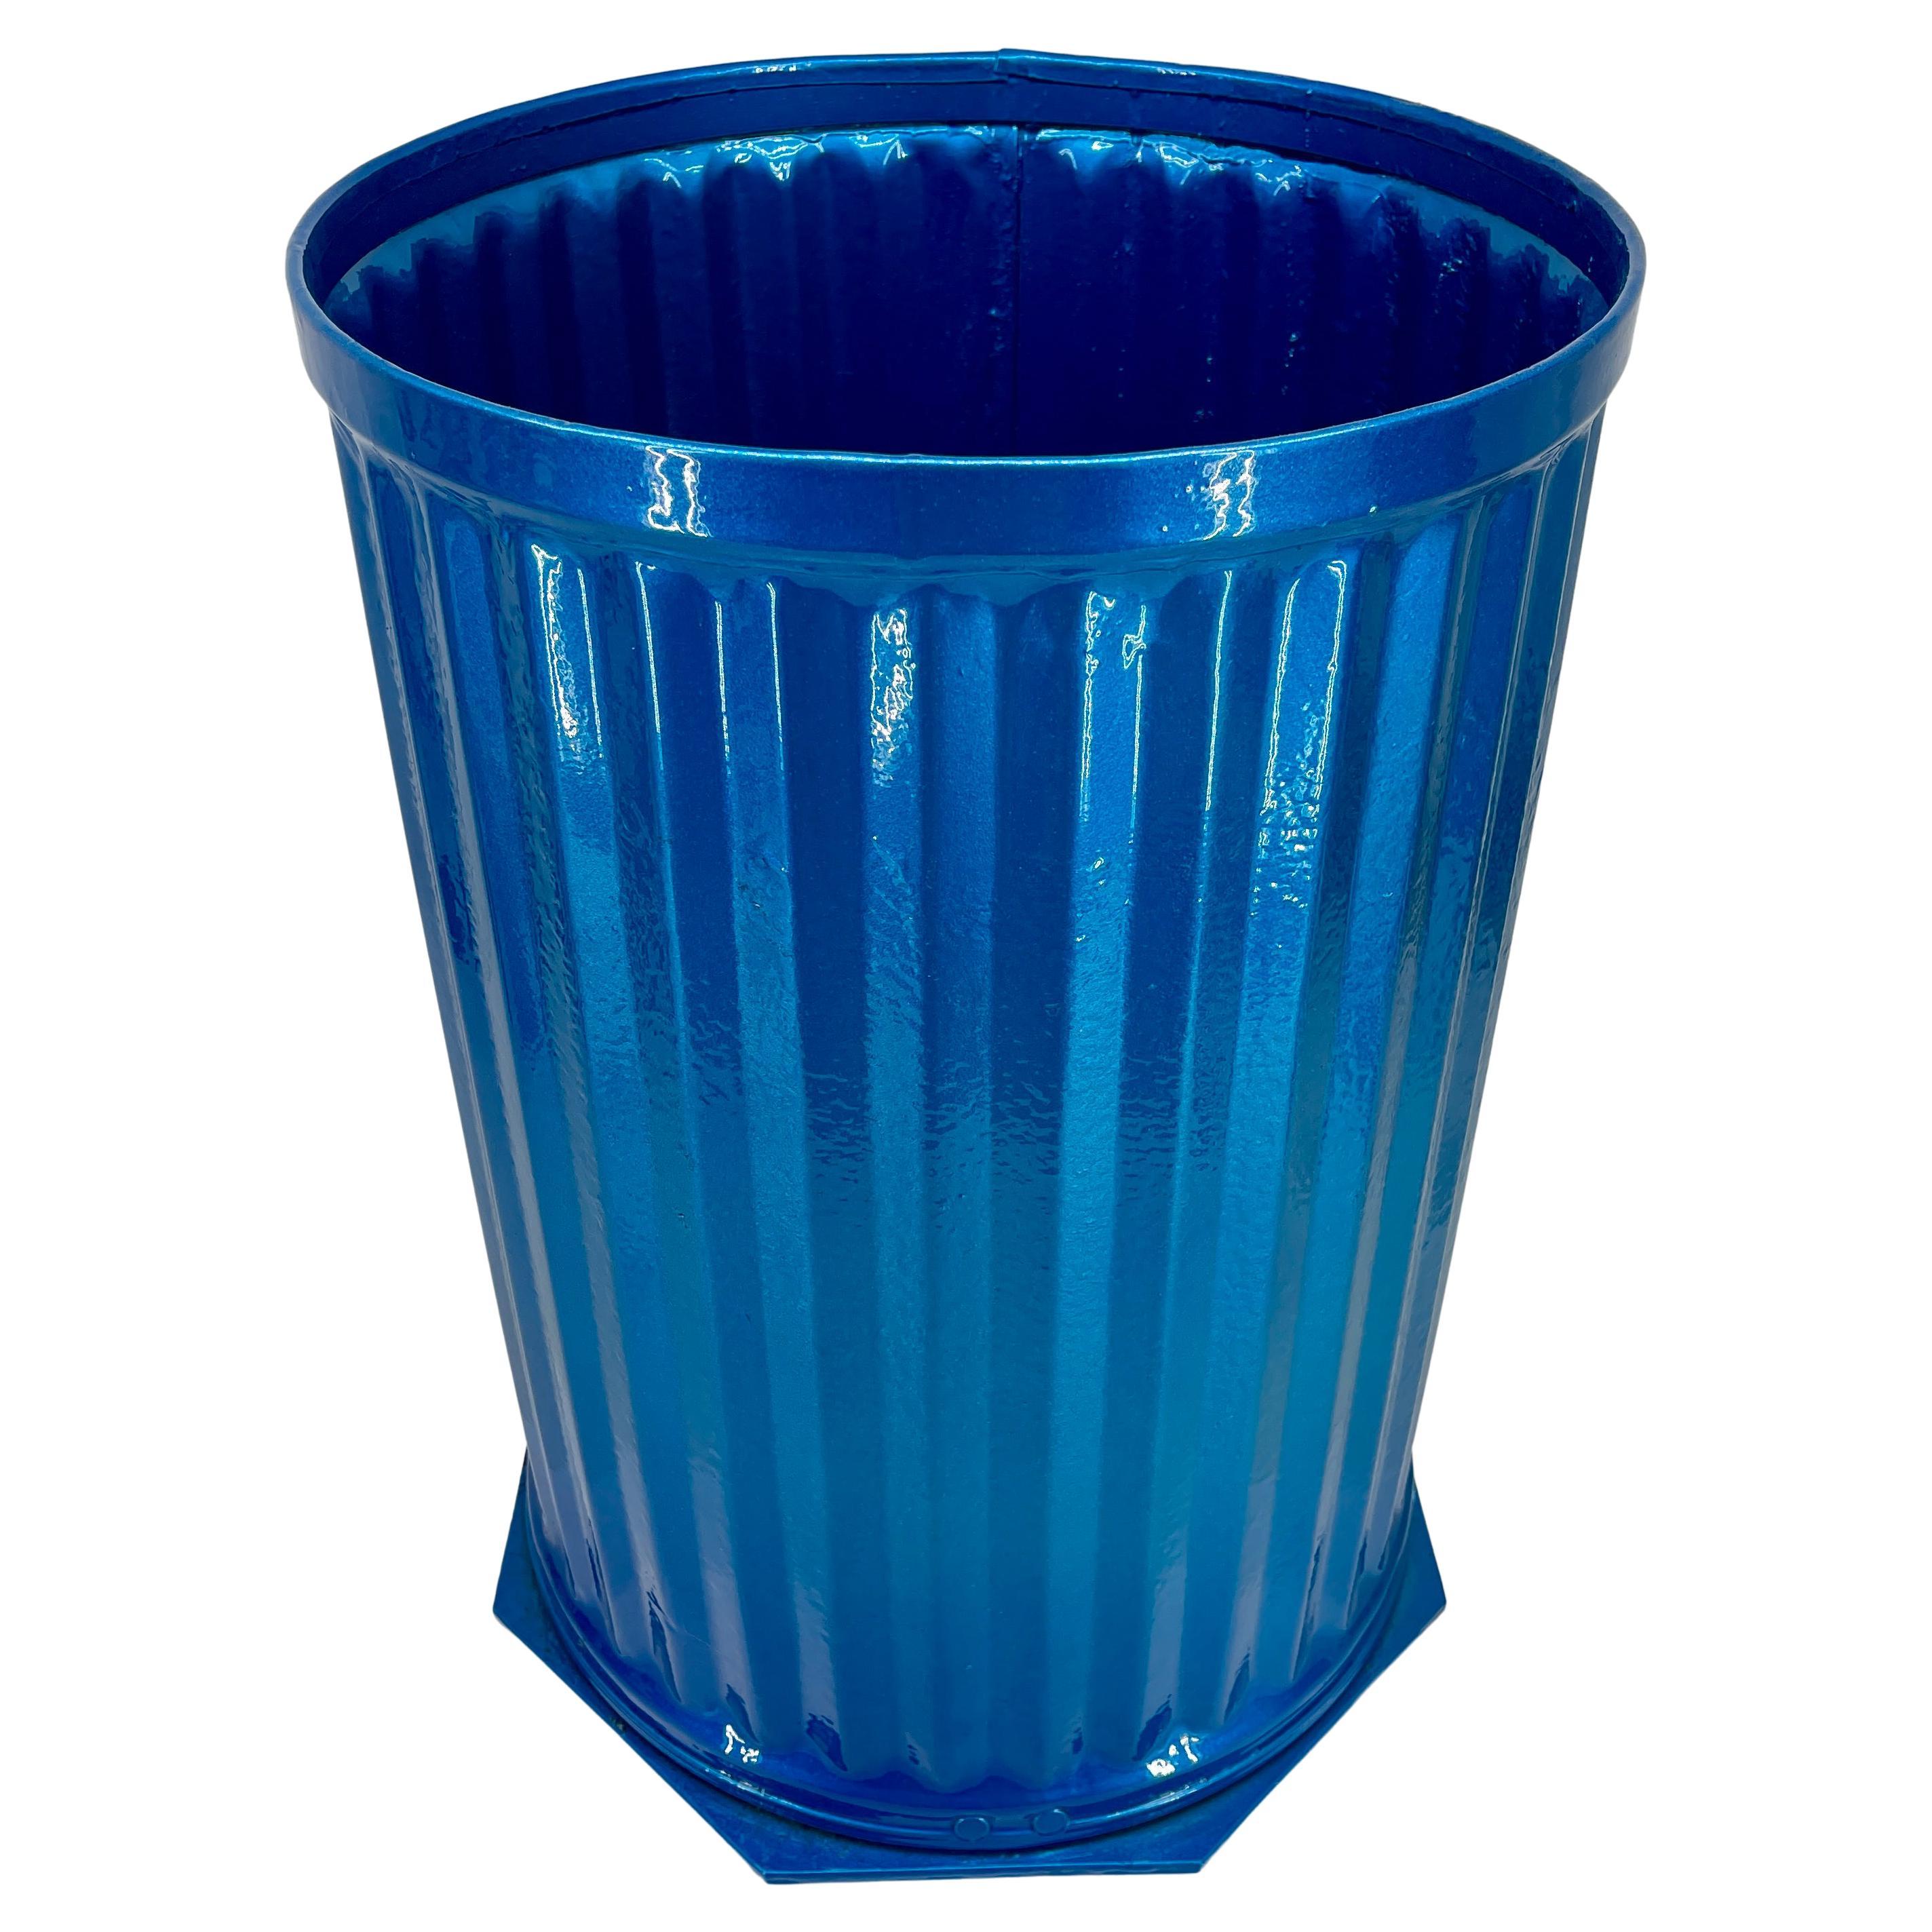 Powder Coated Blue Industrial Metal Bin, Umbrella Stand or Trash Can For Sale